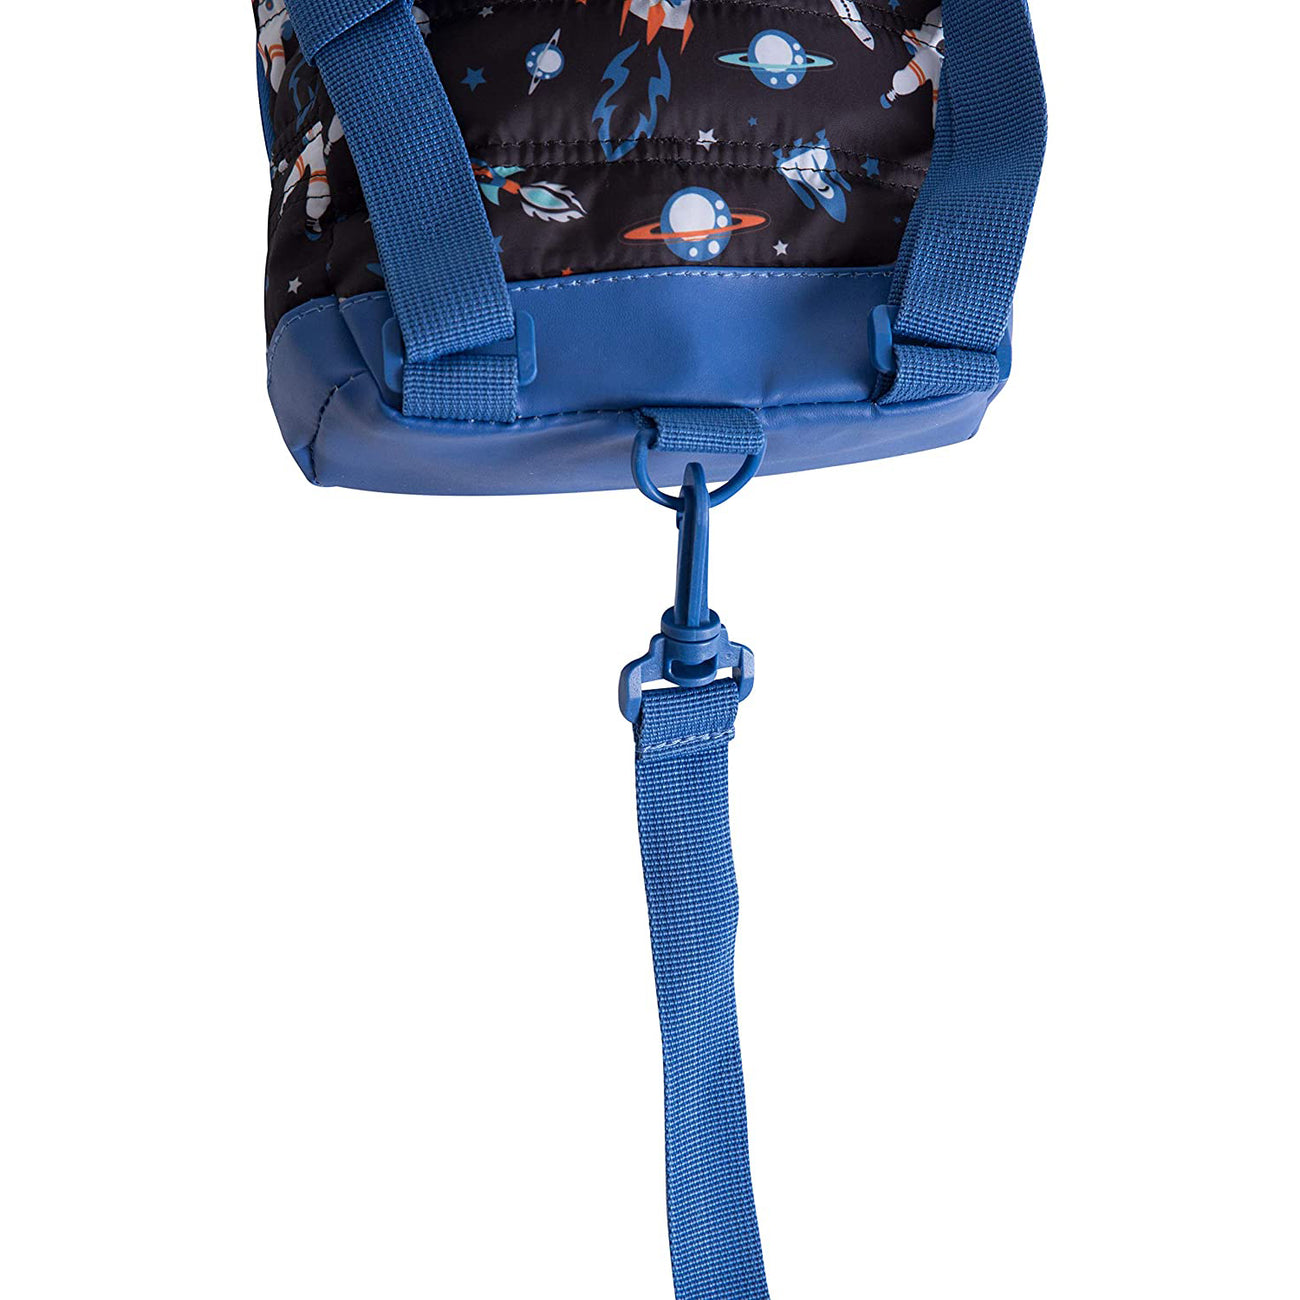 Quilted Space Backpack with Safety Harness Leash - Nuby US